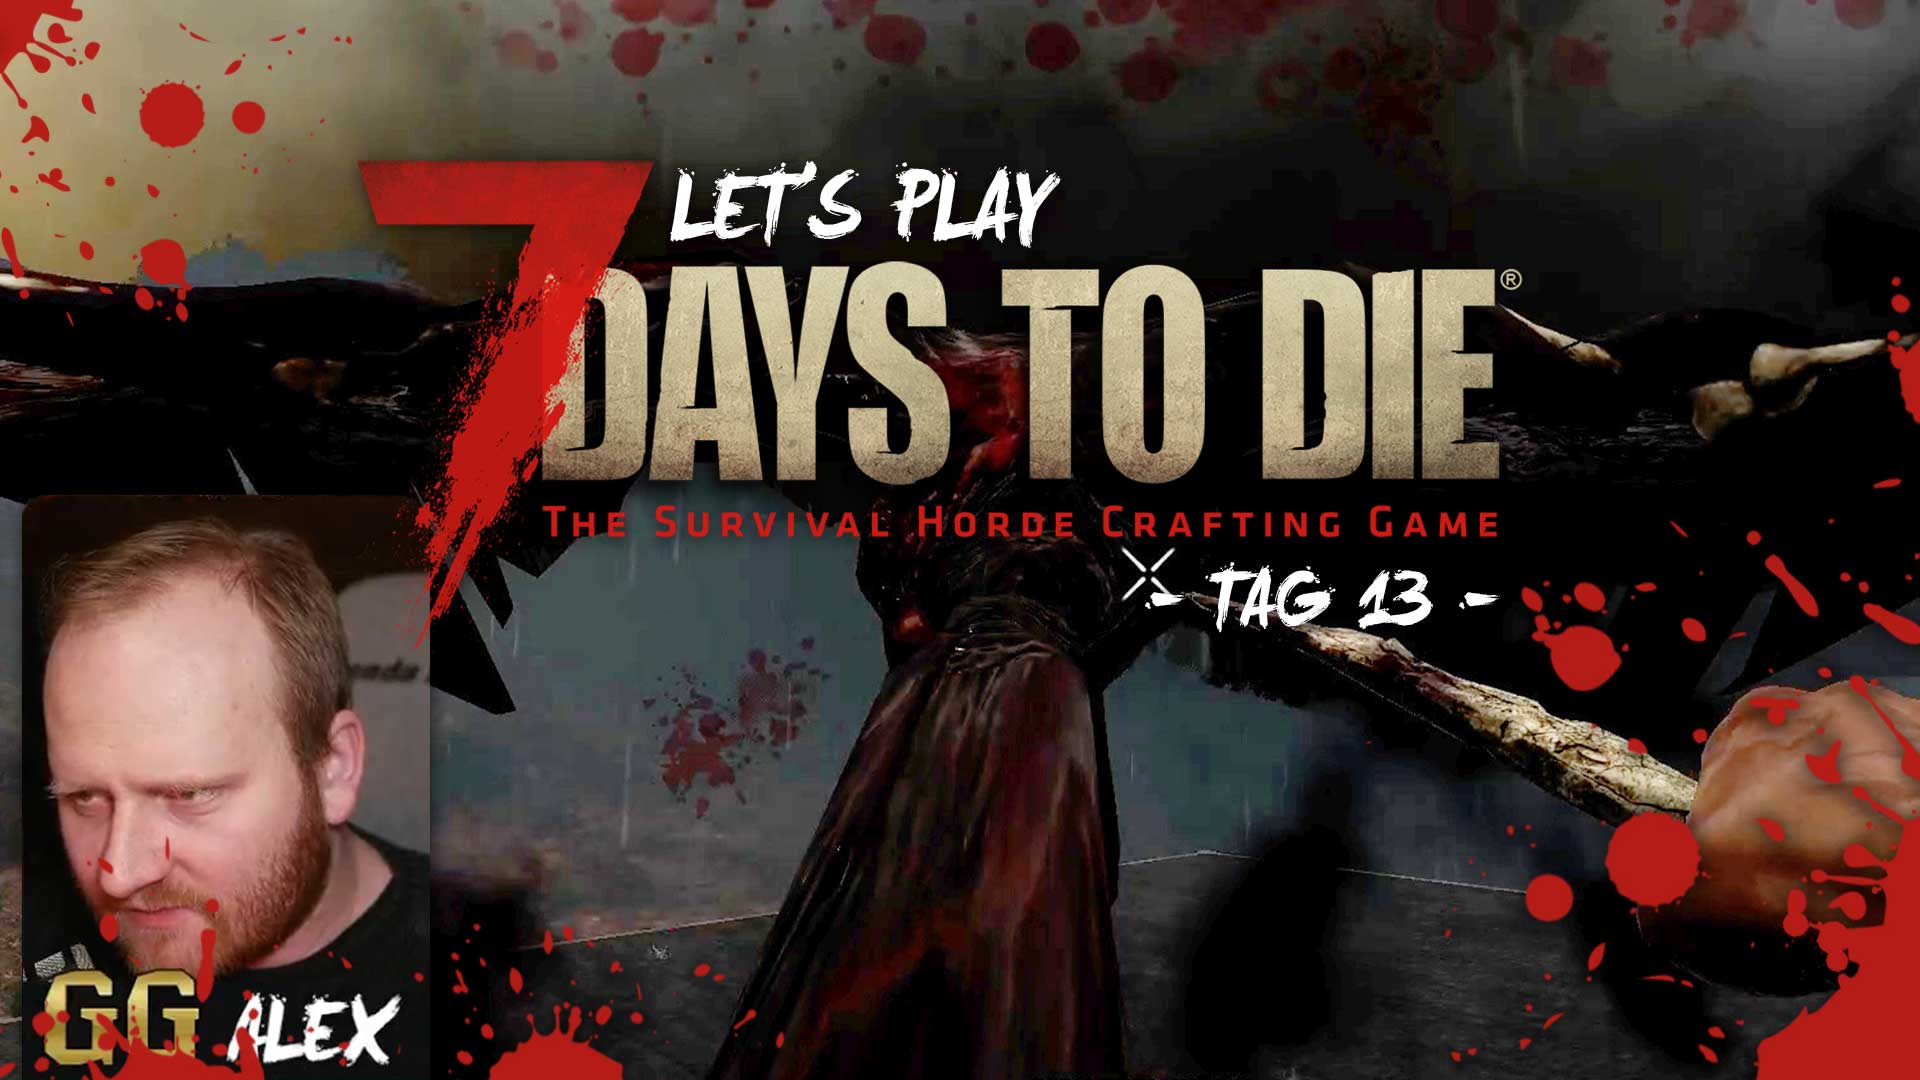 lets play 7 days to die tag 13 GG